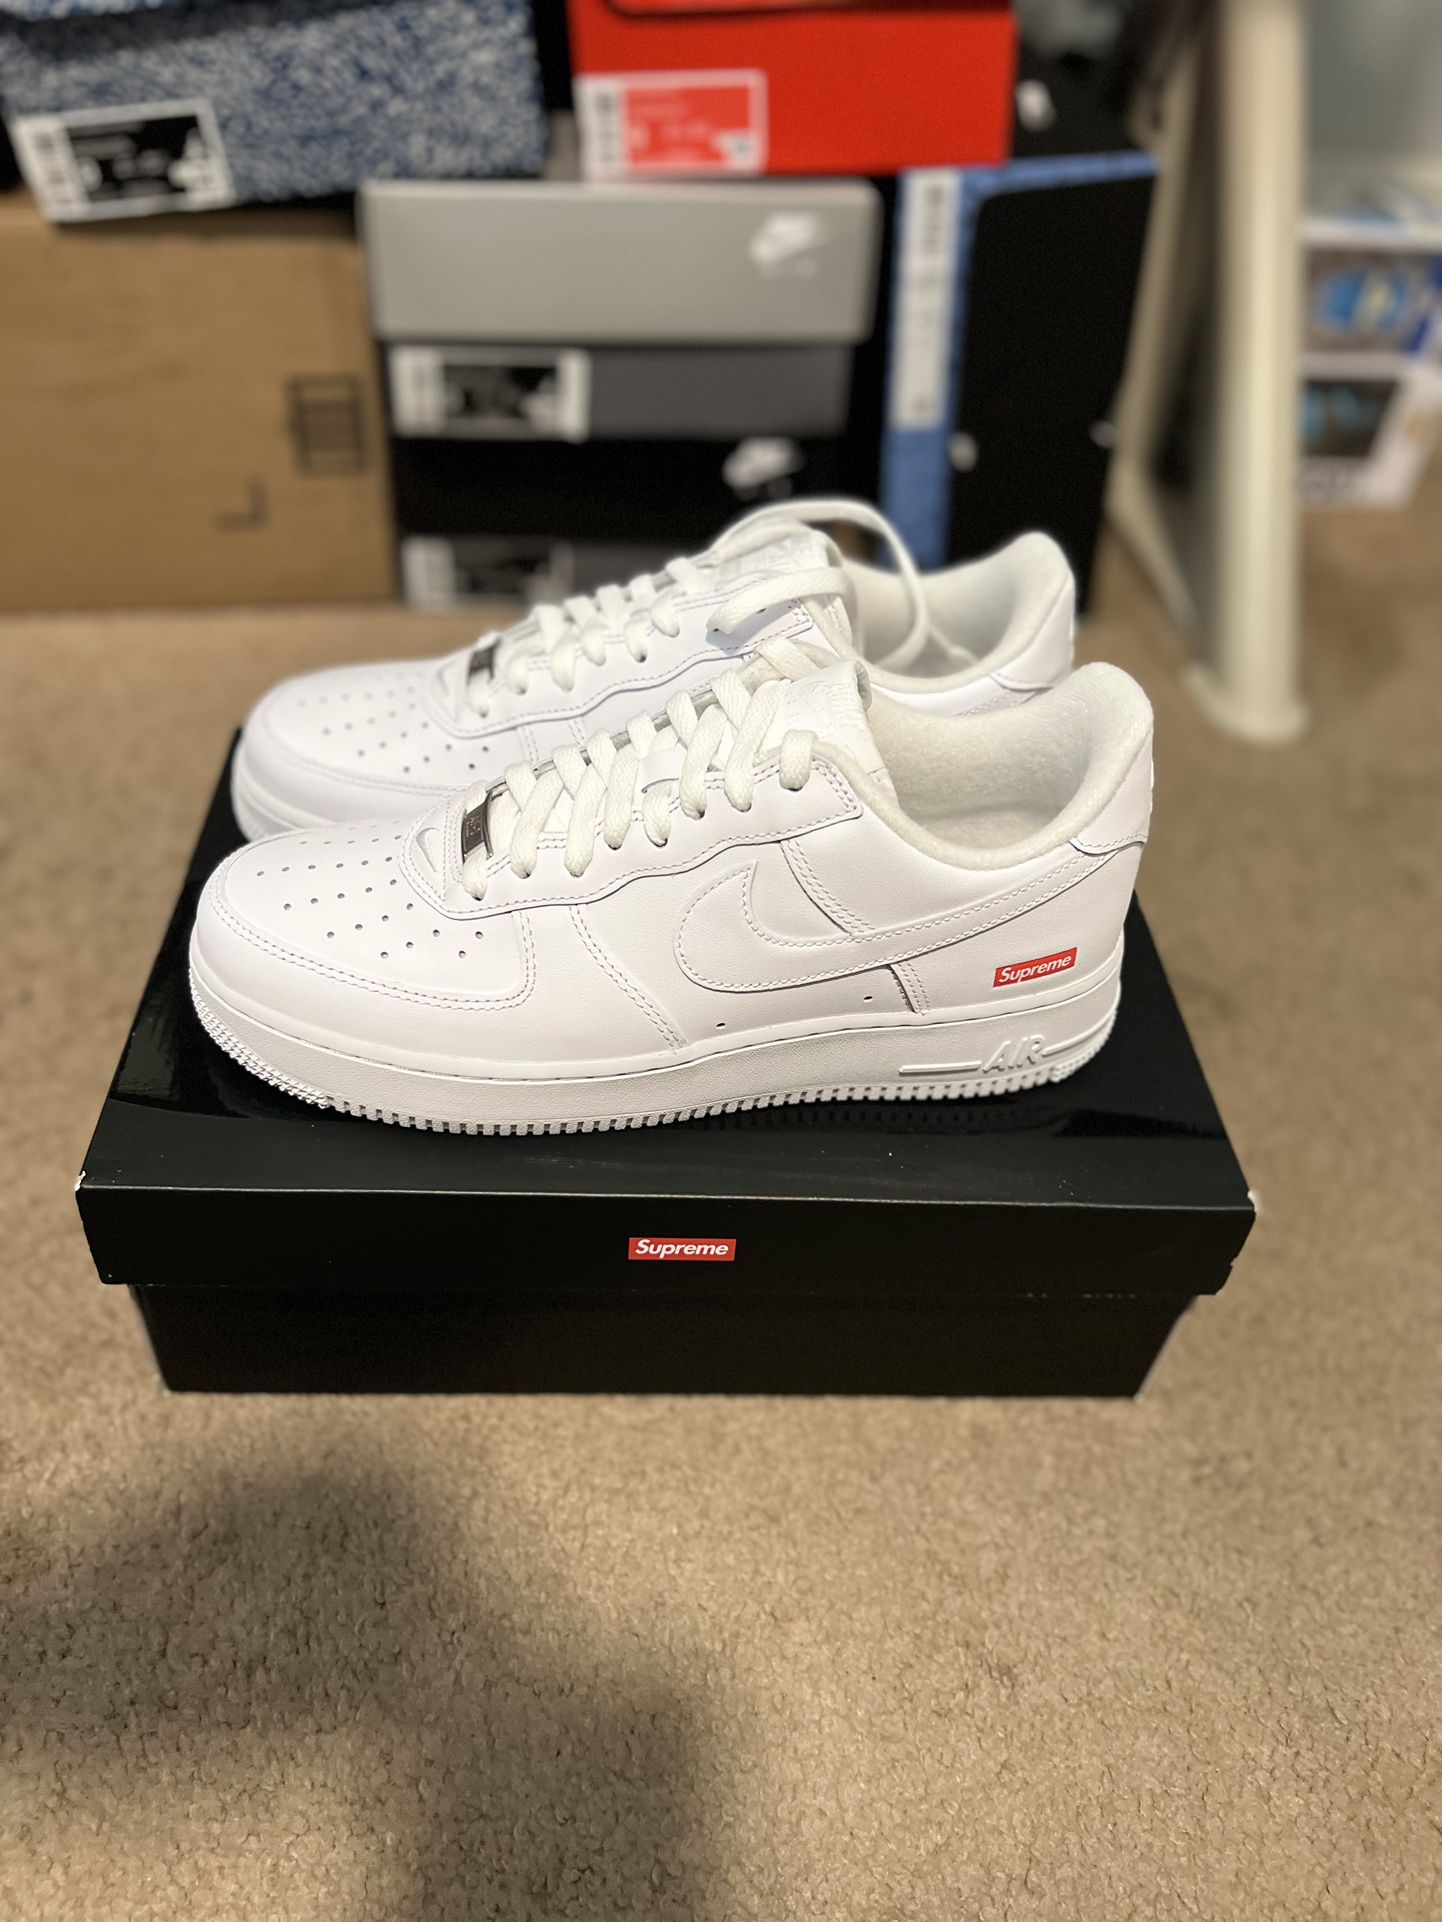 Supreme Air Force 1 Low Size 9